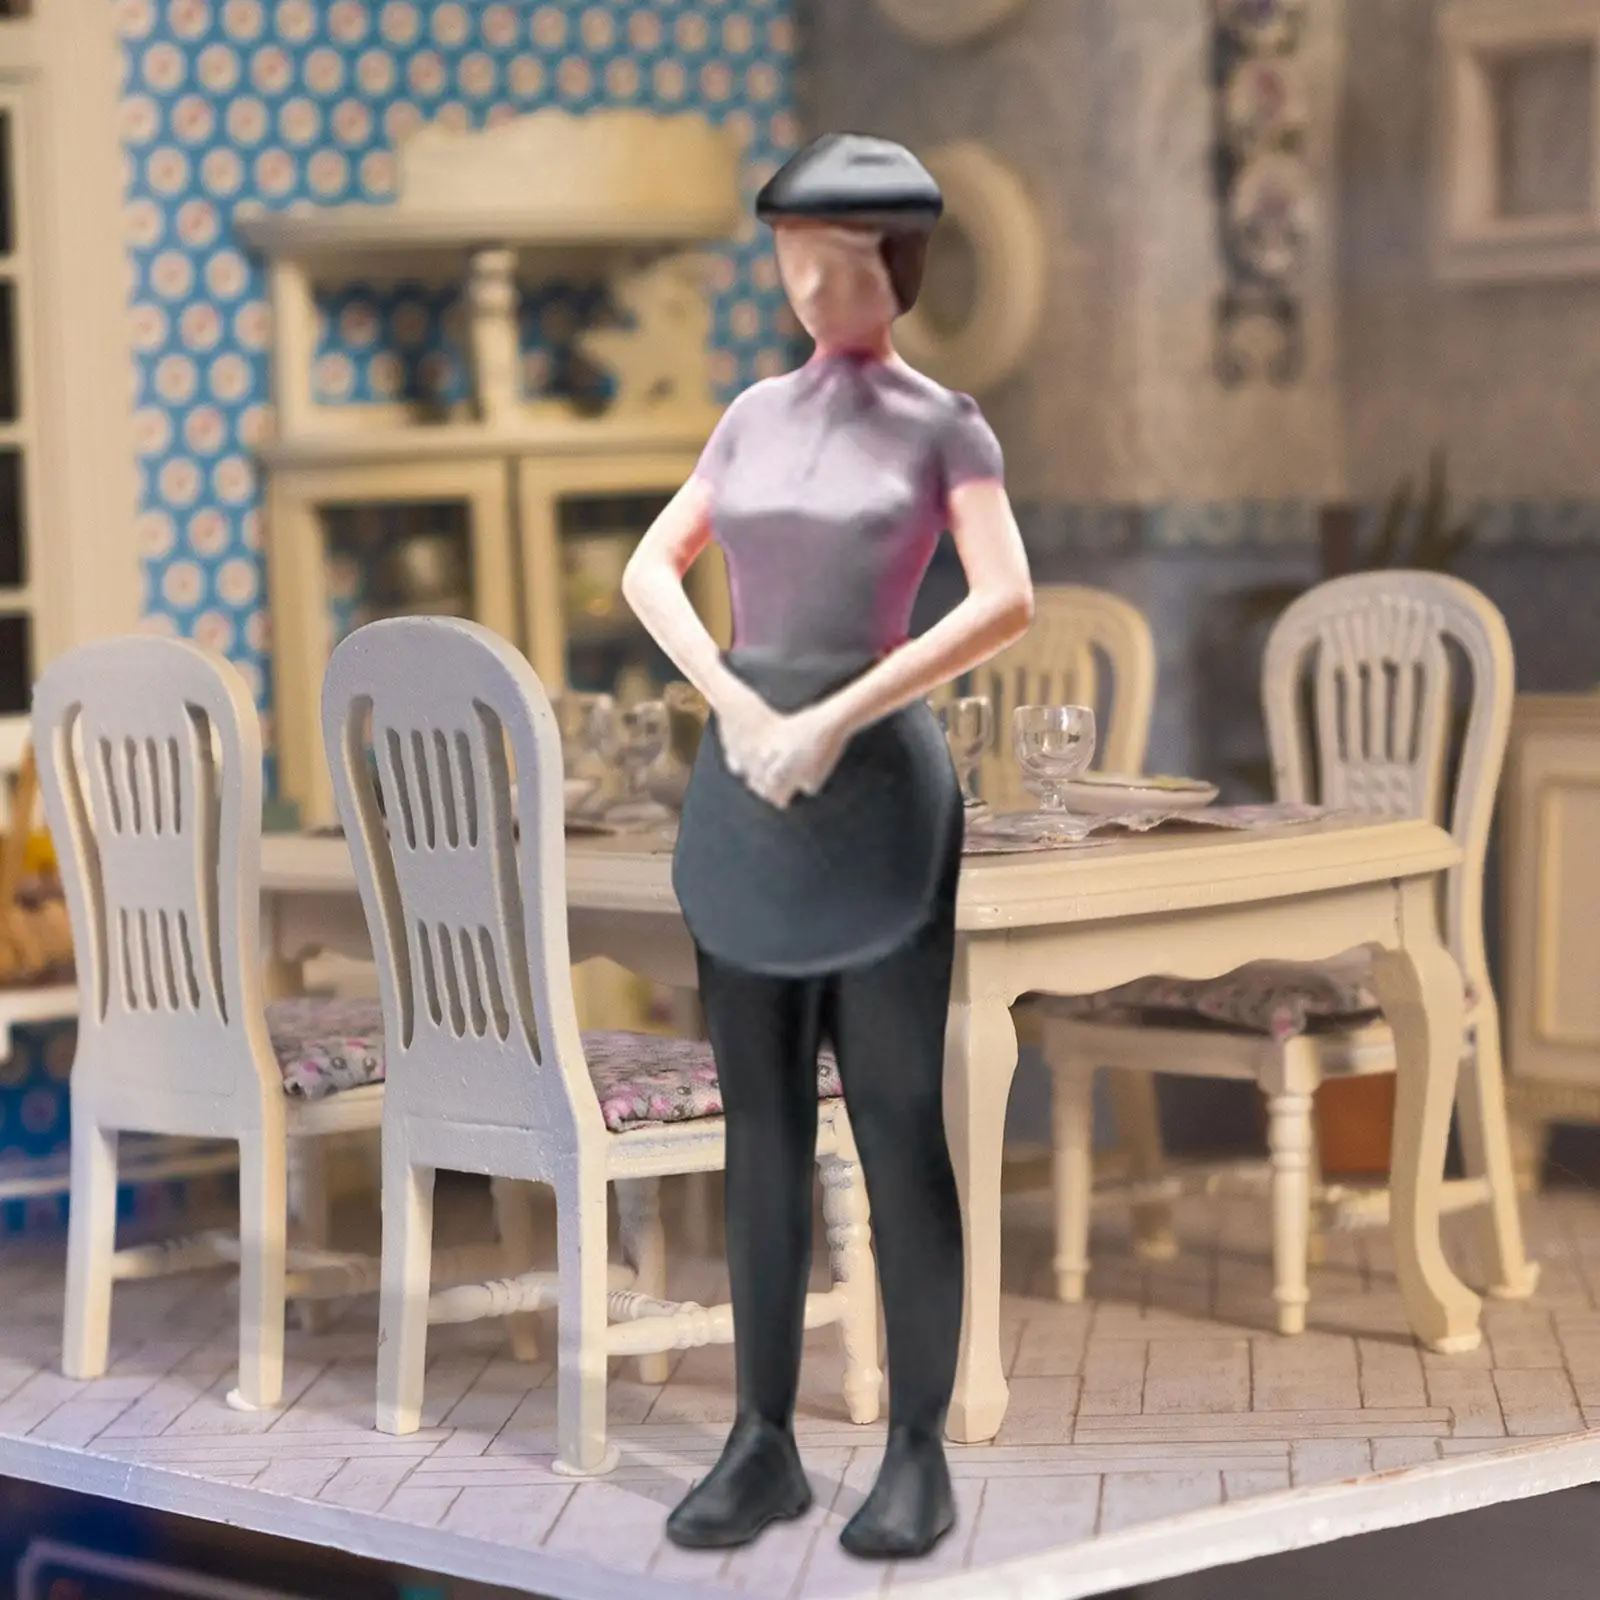 1/64 Model Waitress Figures Collection Realistic Tiny People Model for Dollhouse Scenery Landscape Photography Props Accessories